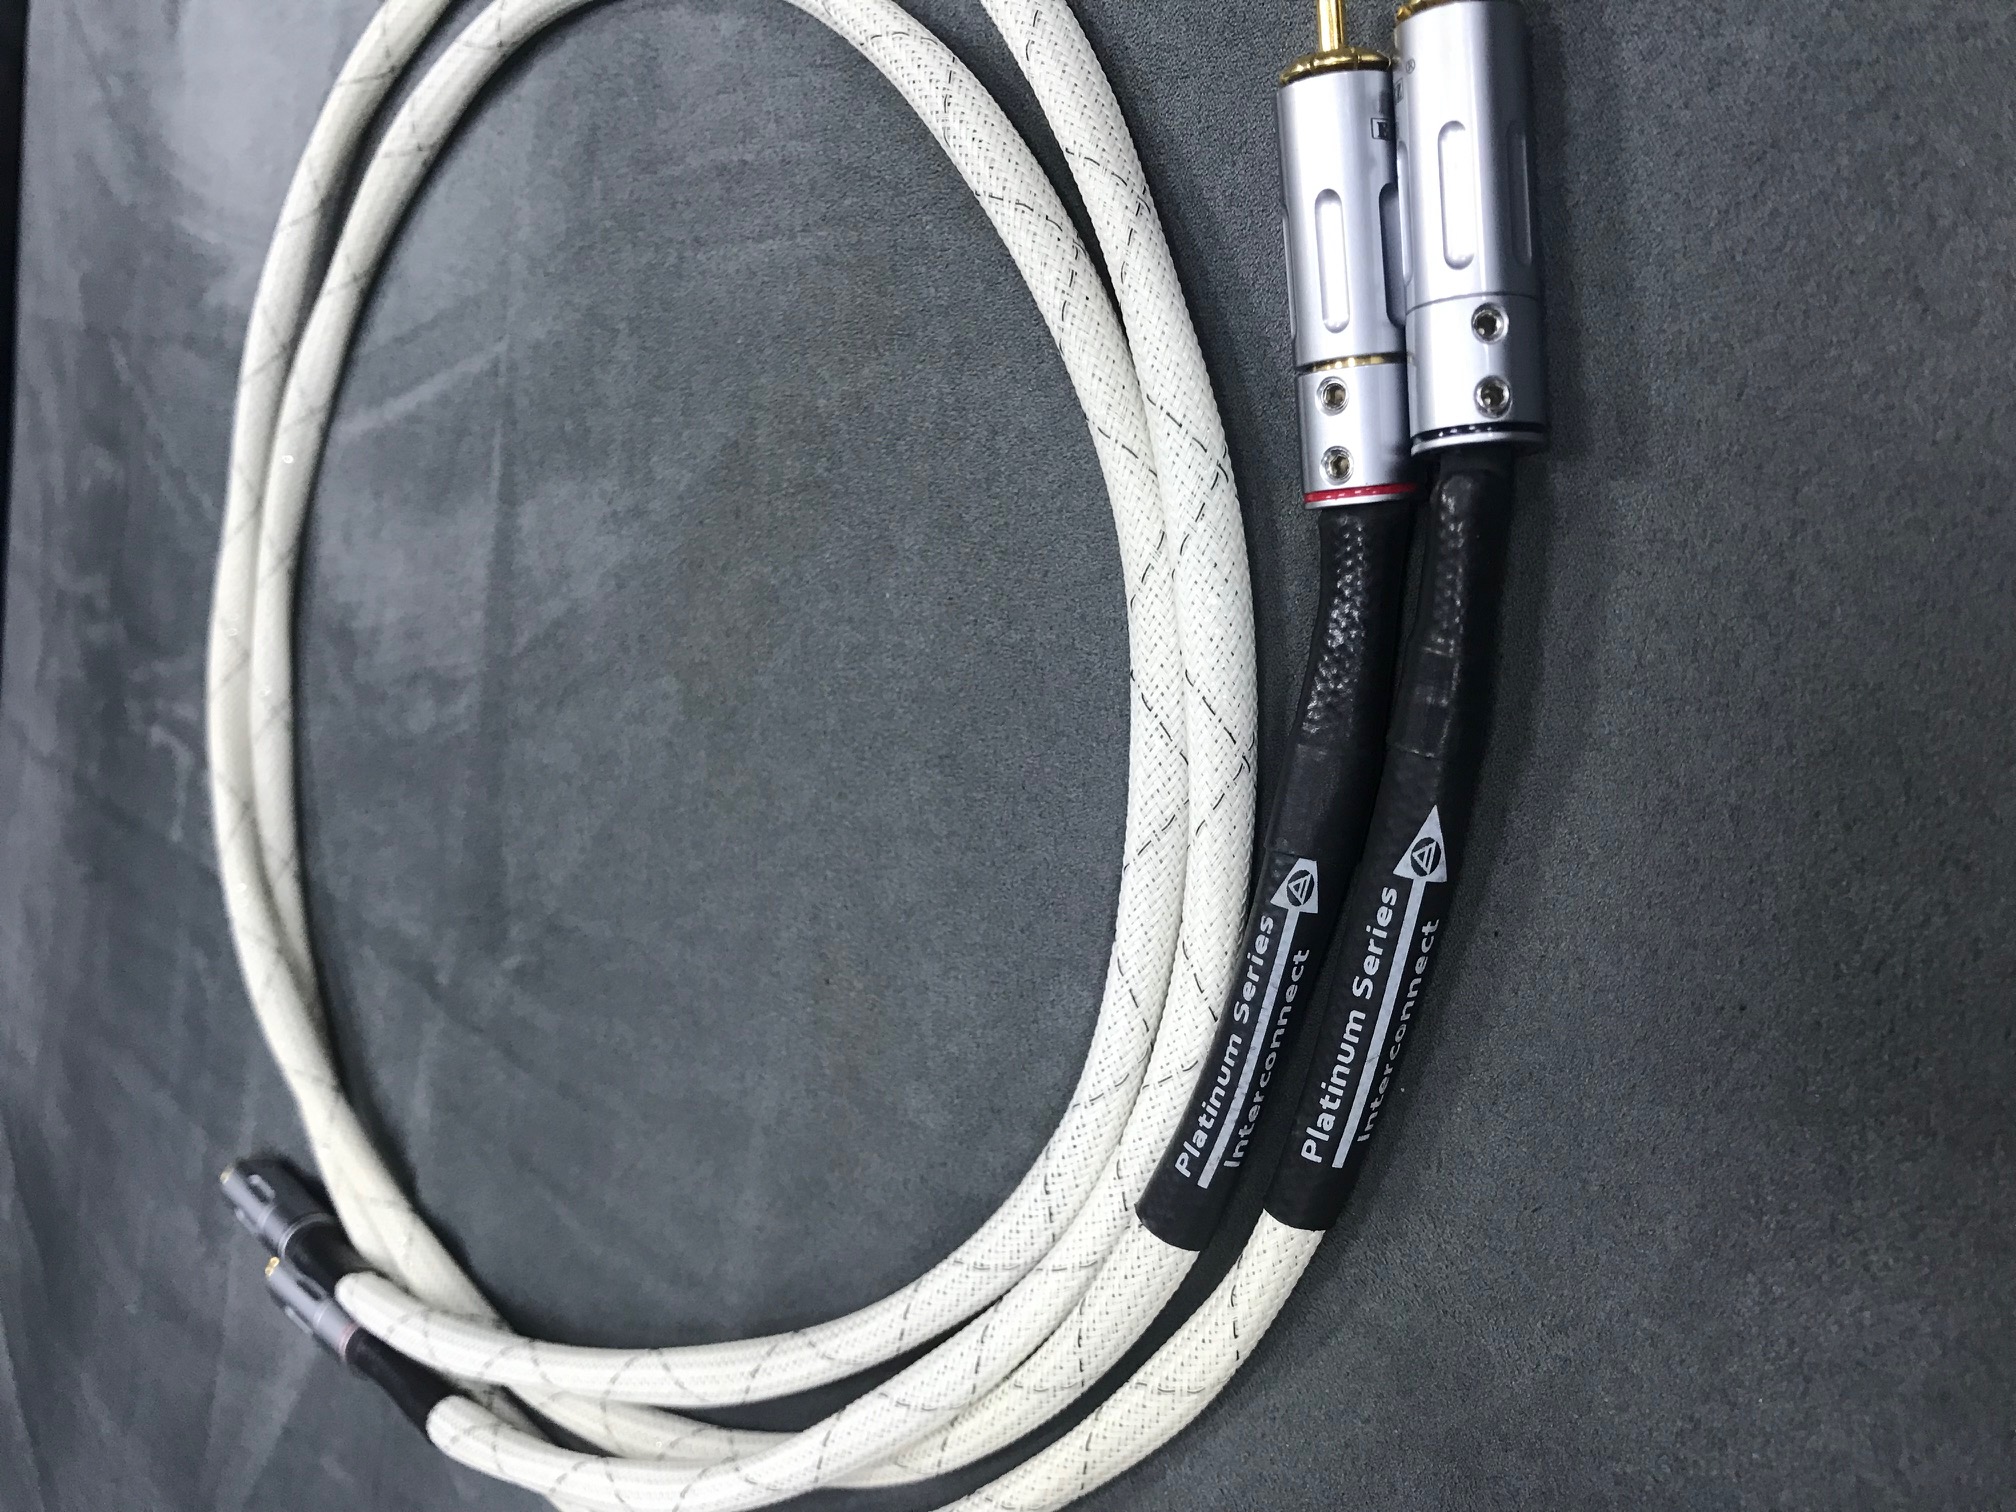 wywires cables